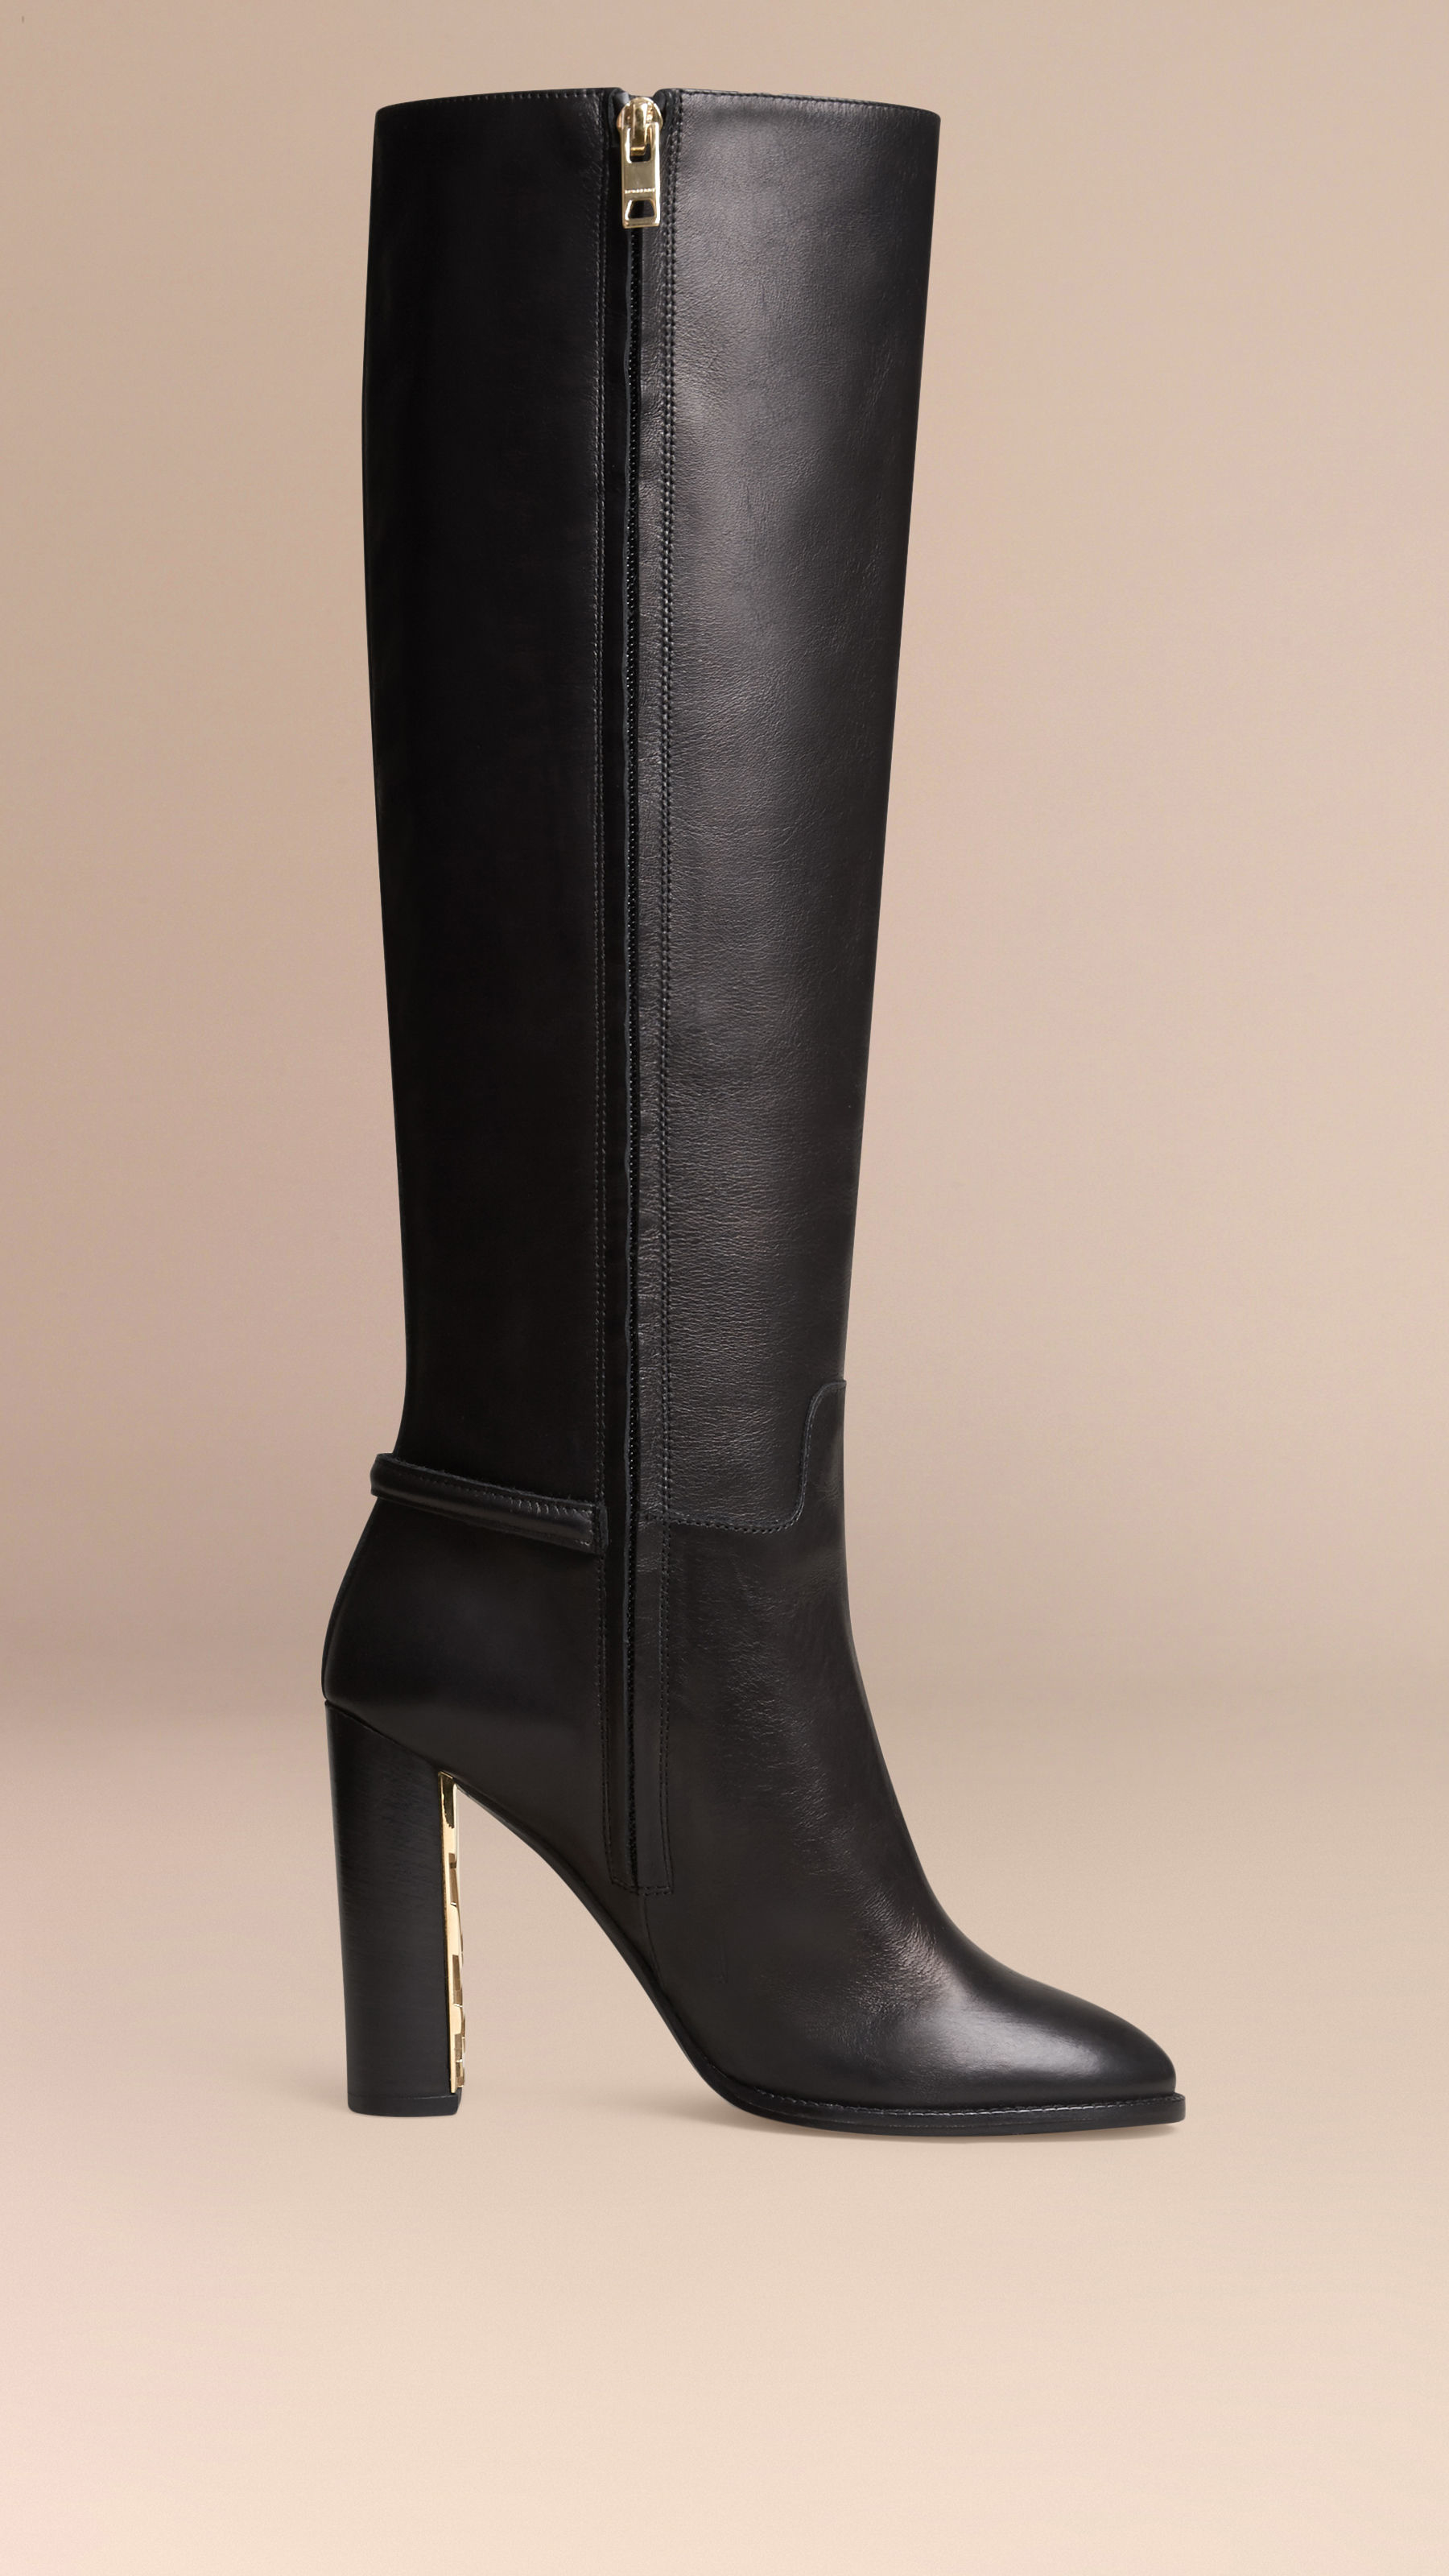 Burberry Knee-high Leather Boots in Black - Lyst